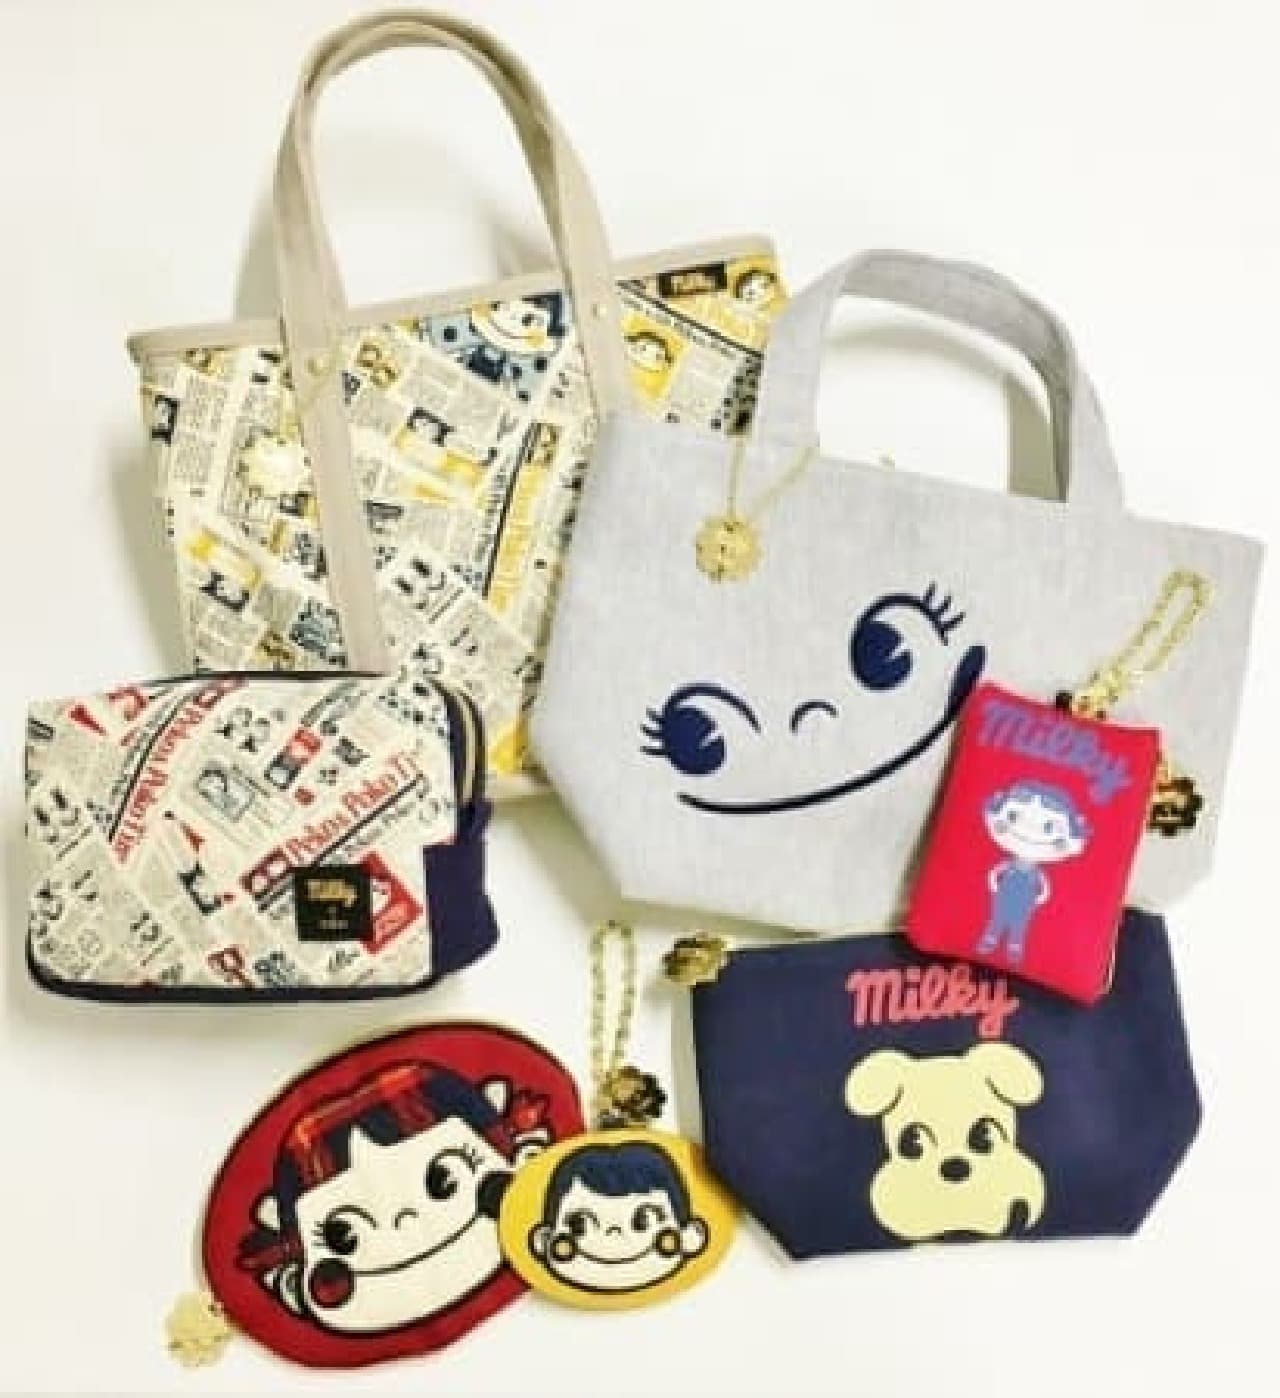 Tote bags and pouches collaborated with Peko-chan and index